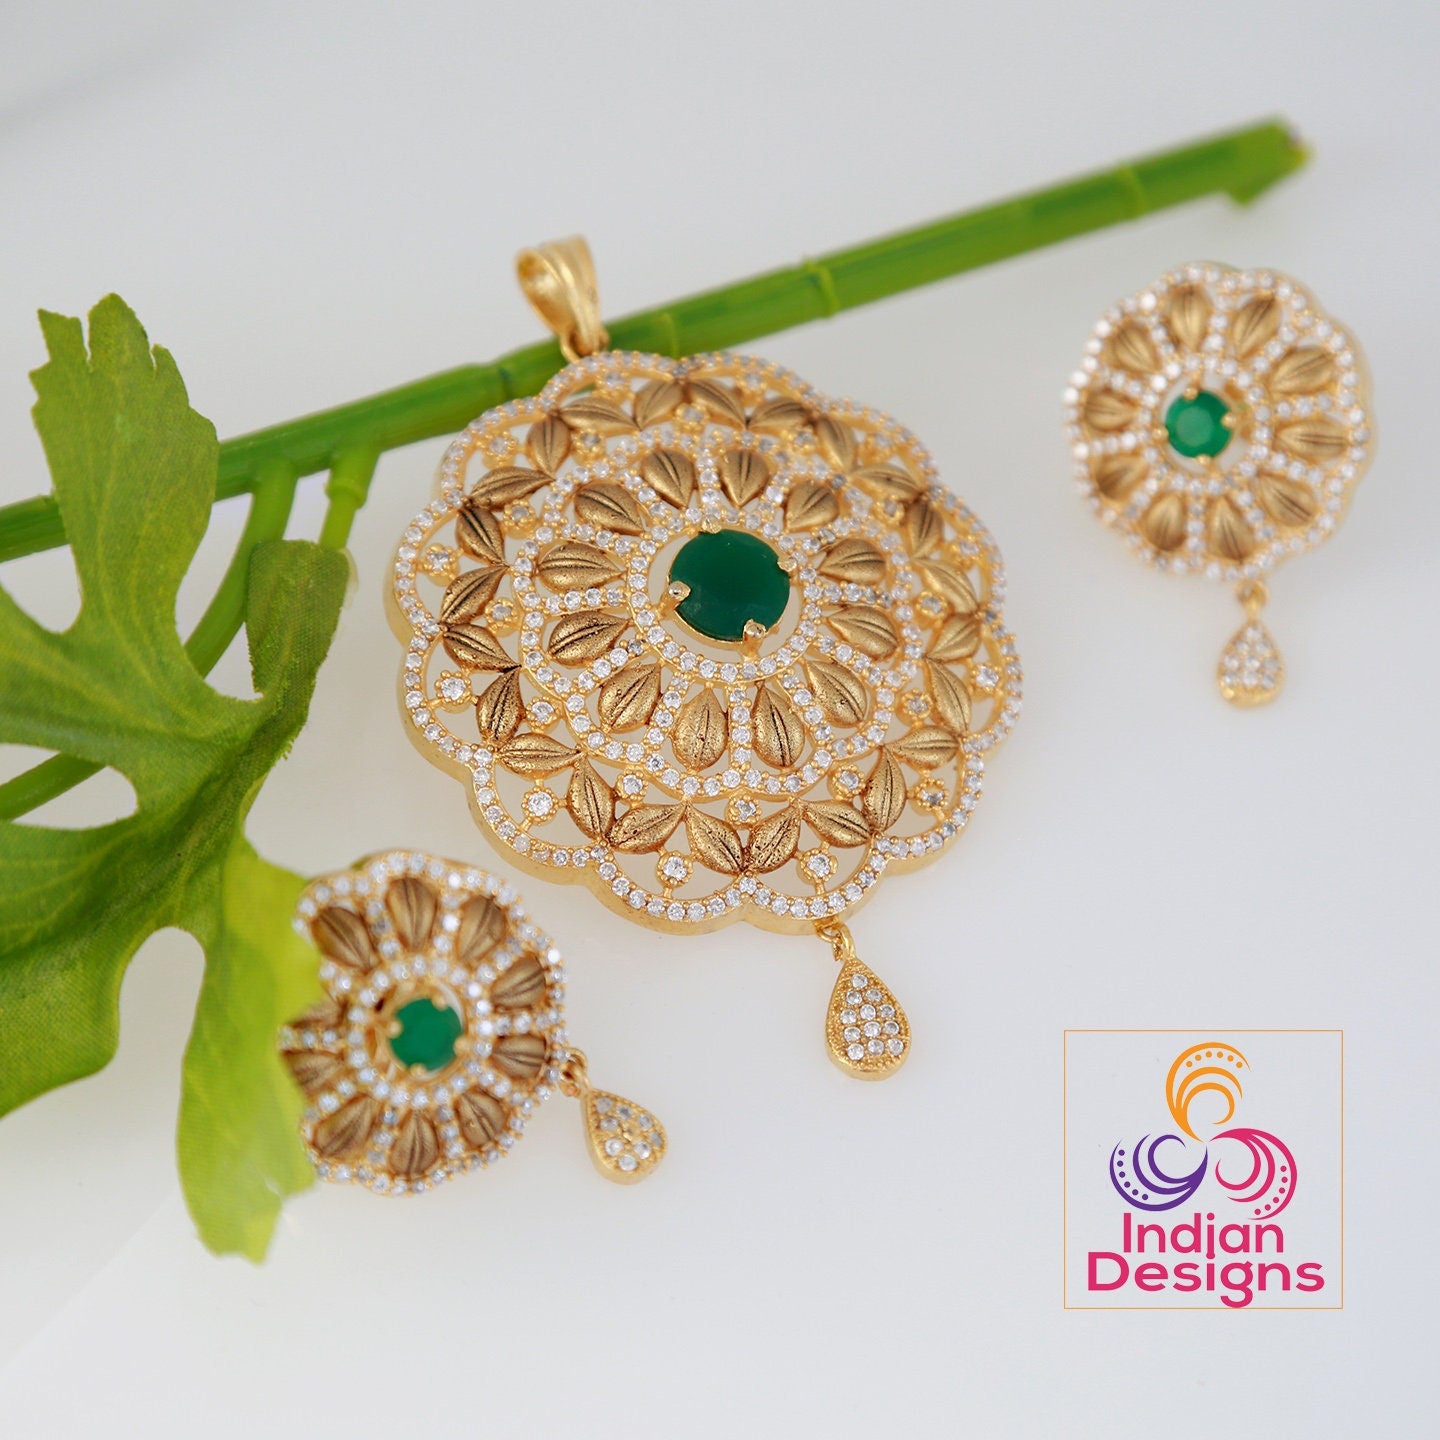 Floral art pendant | American Diamond Pendant Set with Ruby Emerald and White Stones | Matte Finish Gold plated pendant set | Indian jewelry